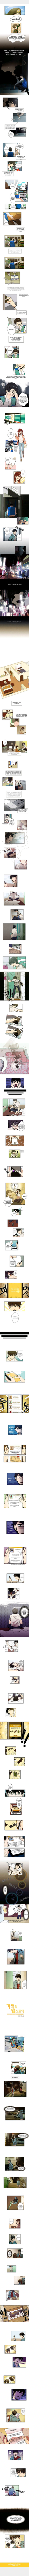 Miracle App Store Ch. 1